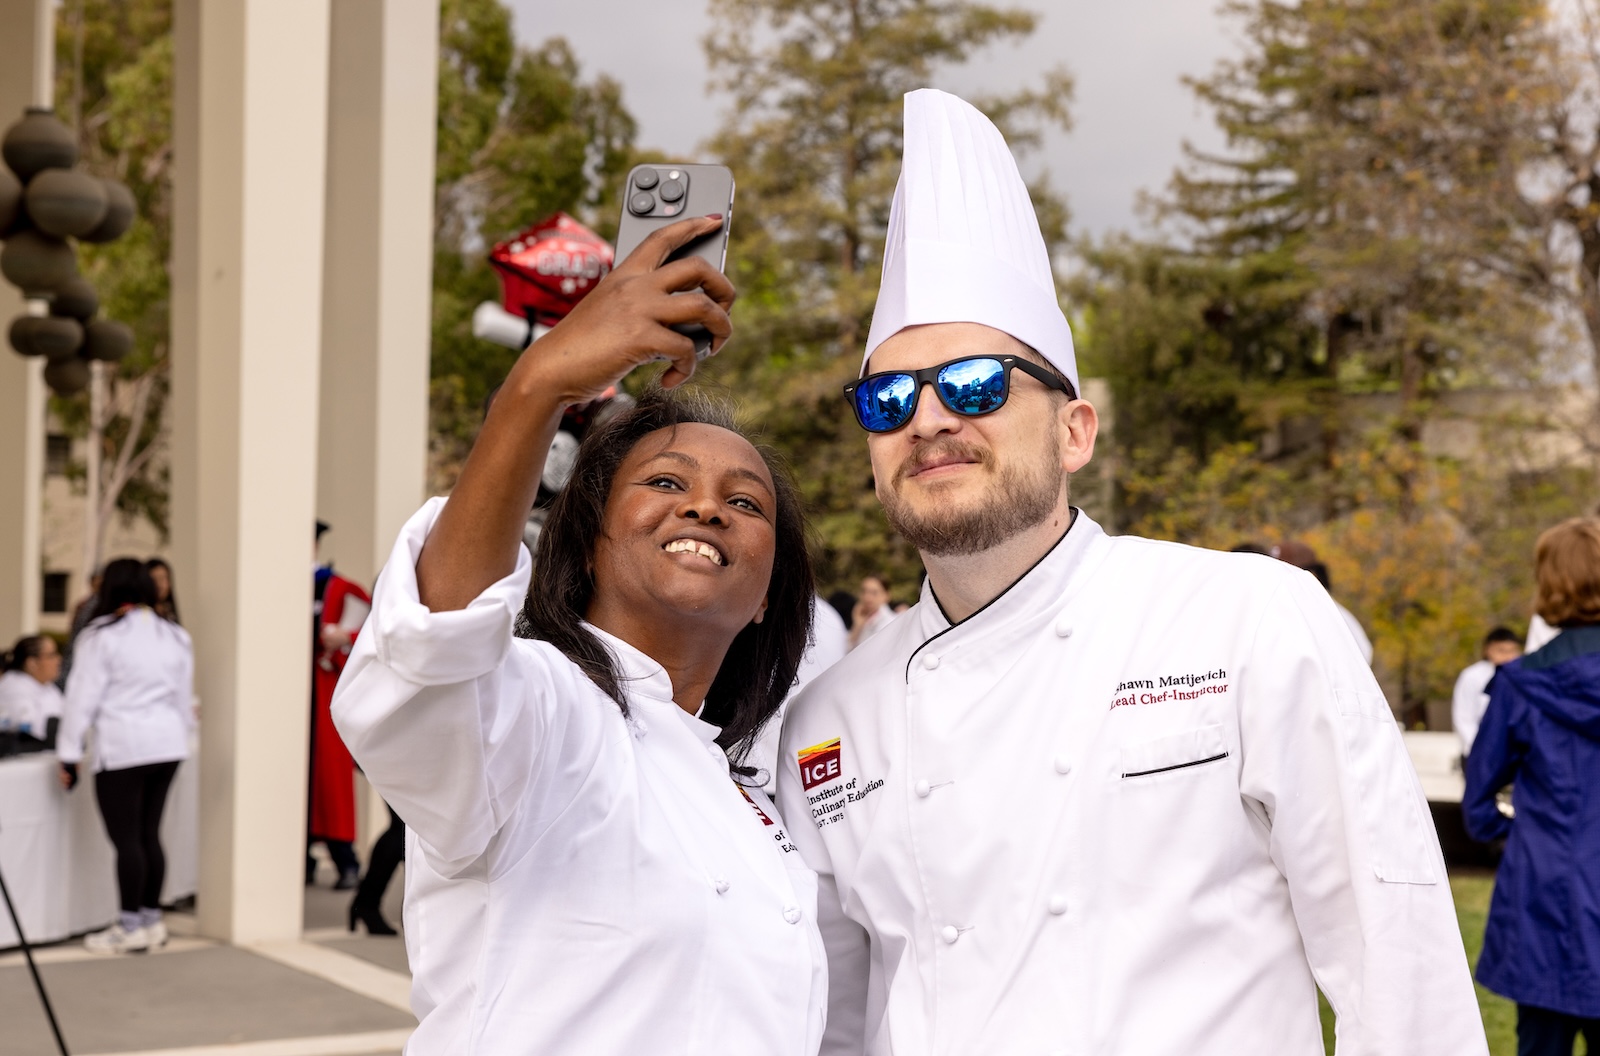 ICE online culinary school graduate Meymuna Hussein-Cattan takes a photo with Lead Chef-Instructor Shawn Matijevich at commencement